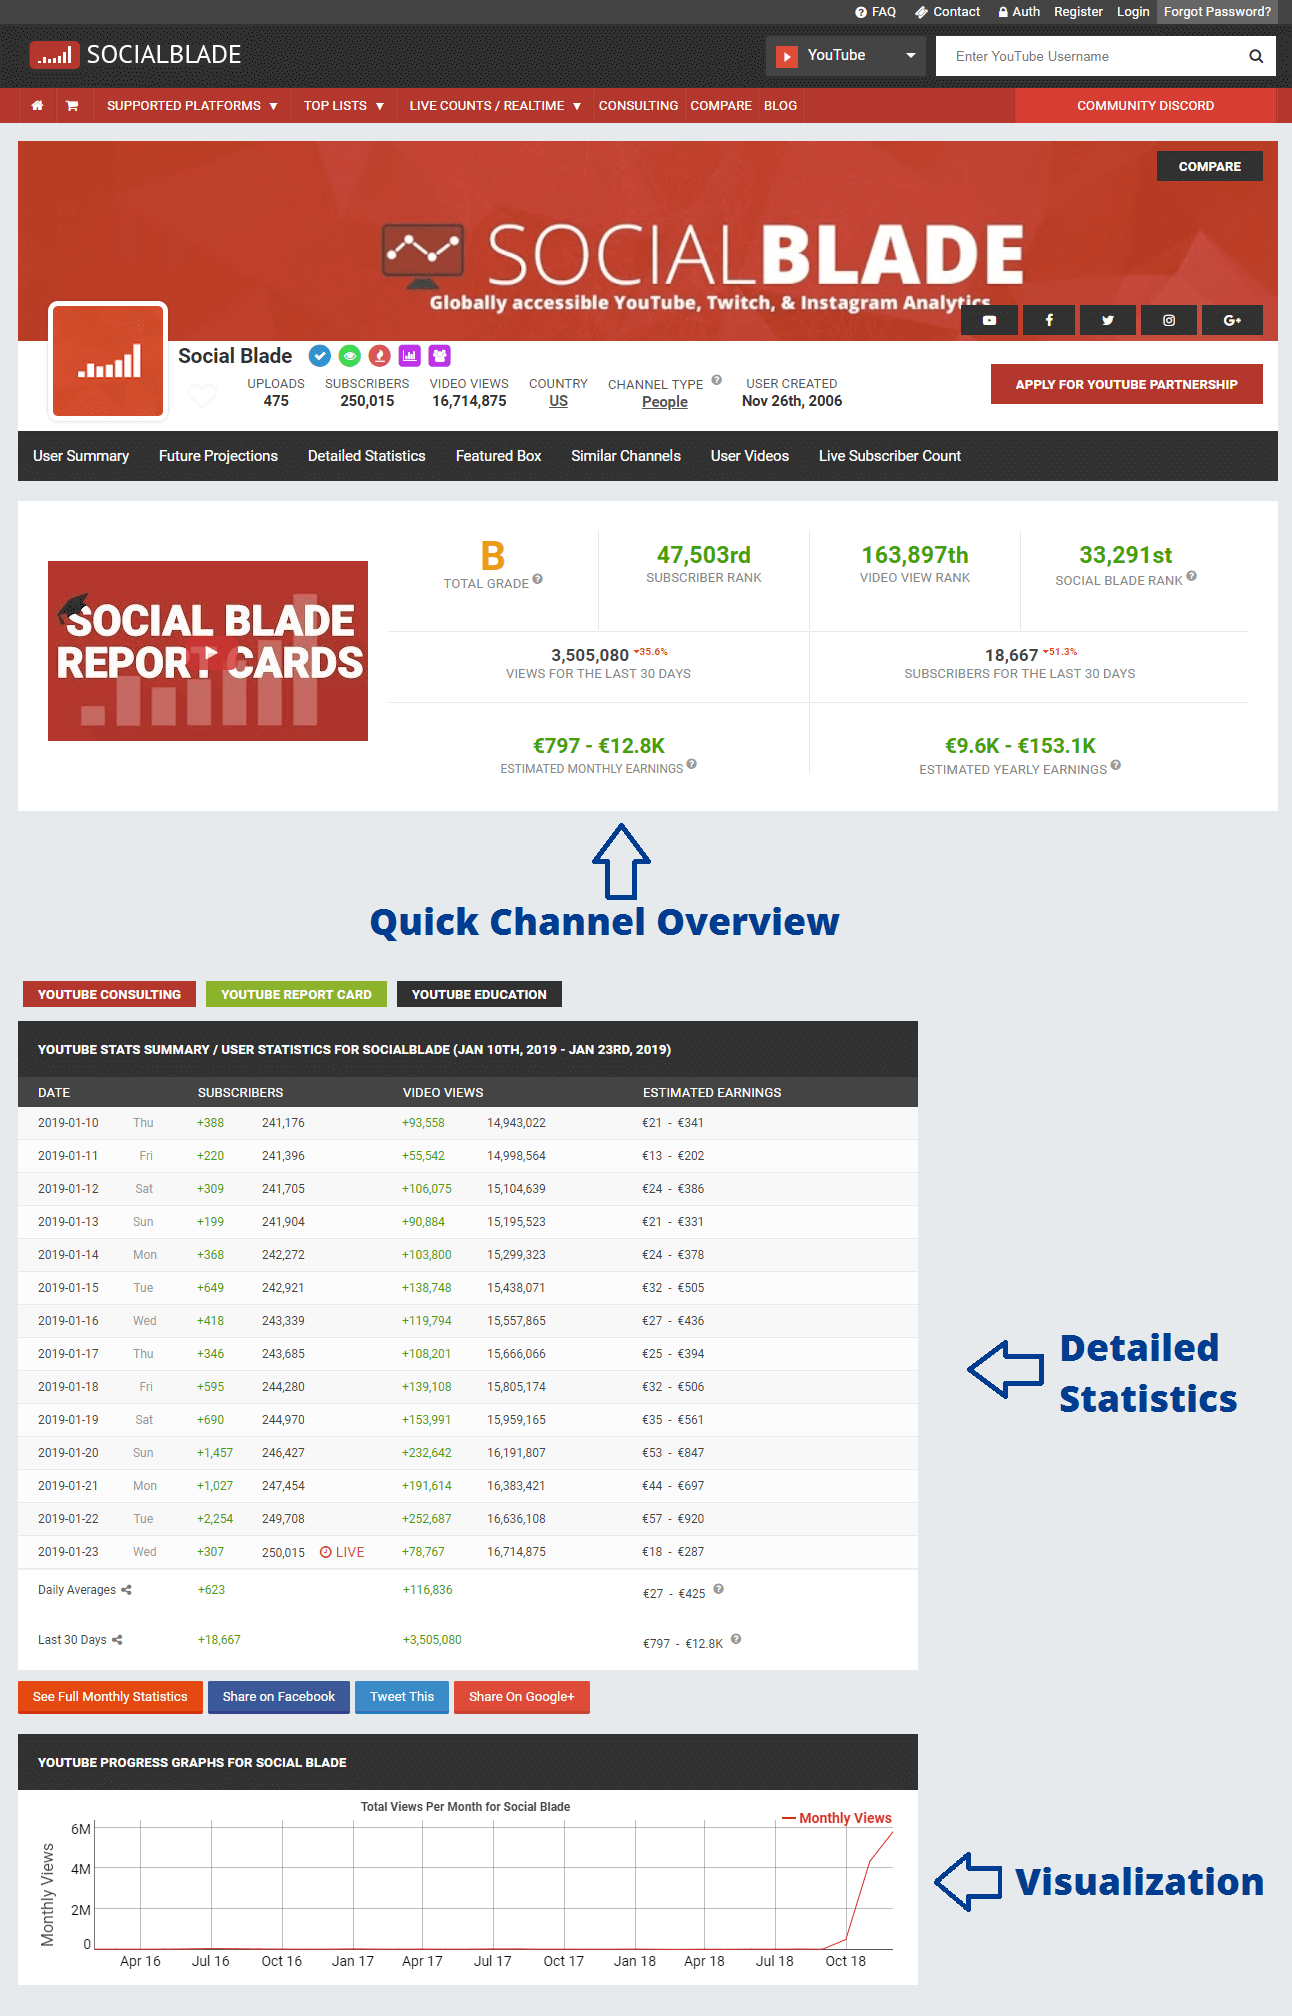 SocialBlade’s page for their own YouTube channel